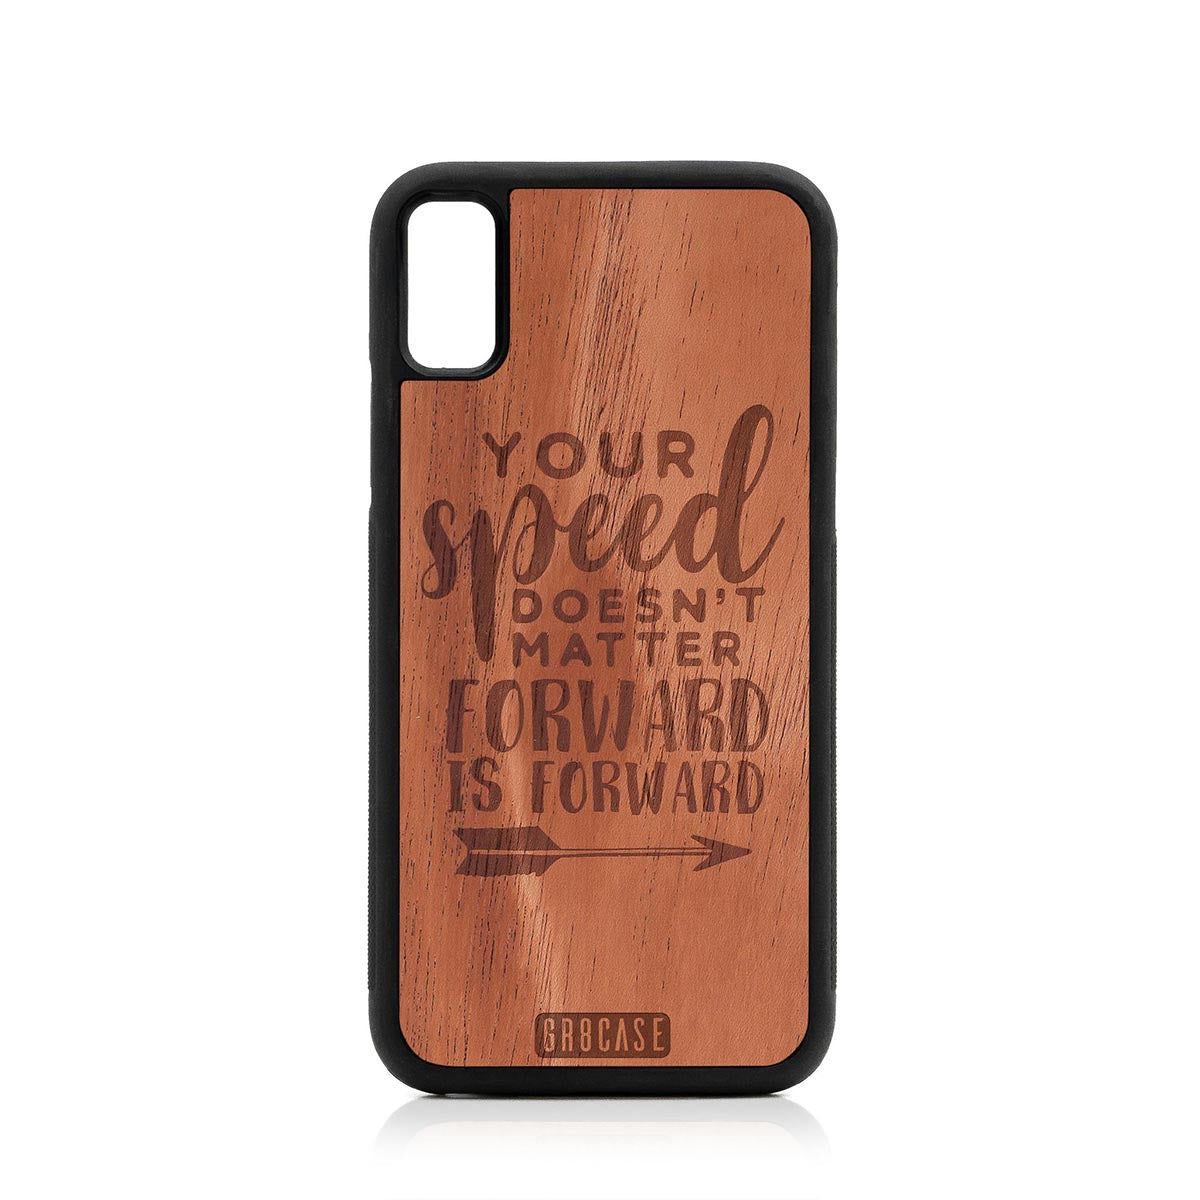 Your Speed Doesn't Matter Forward Is Forward Design Wood Case For iPhone XS Max